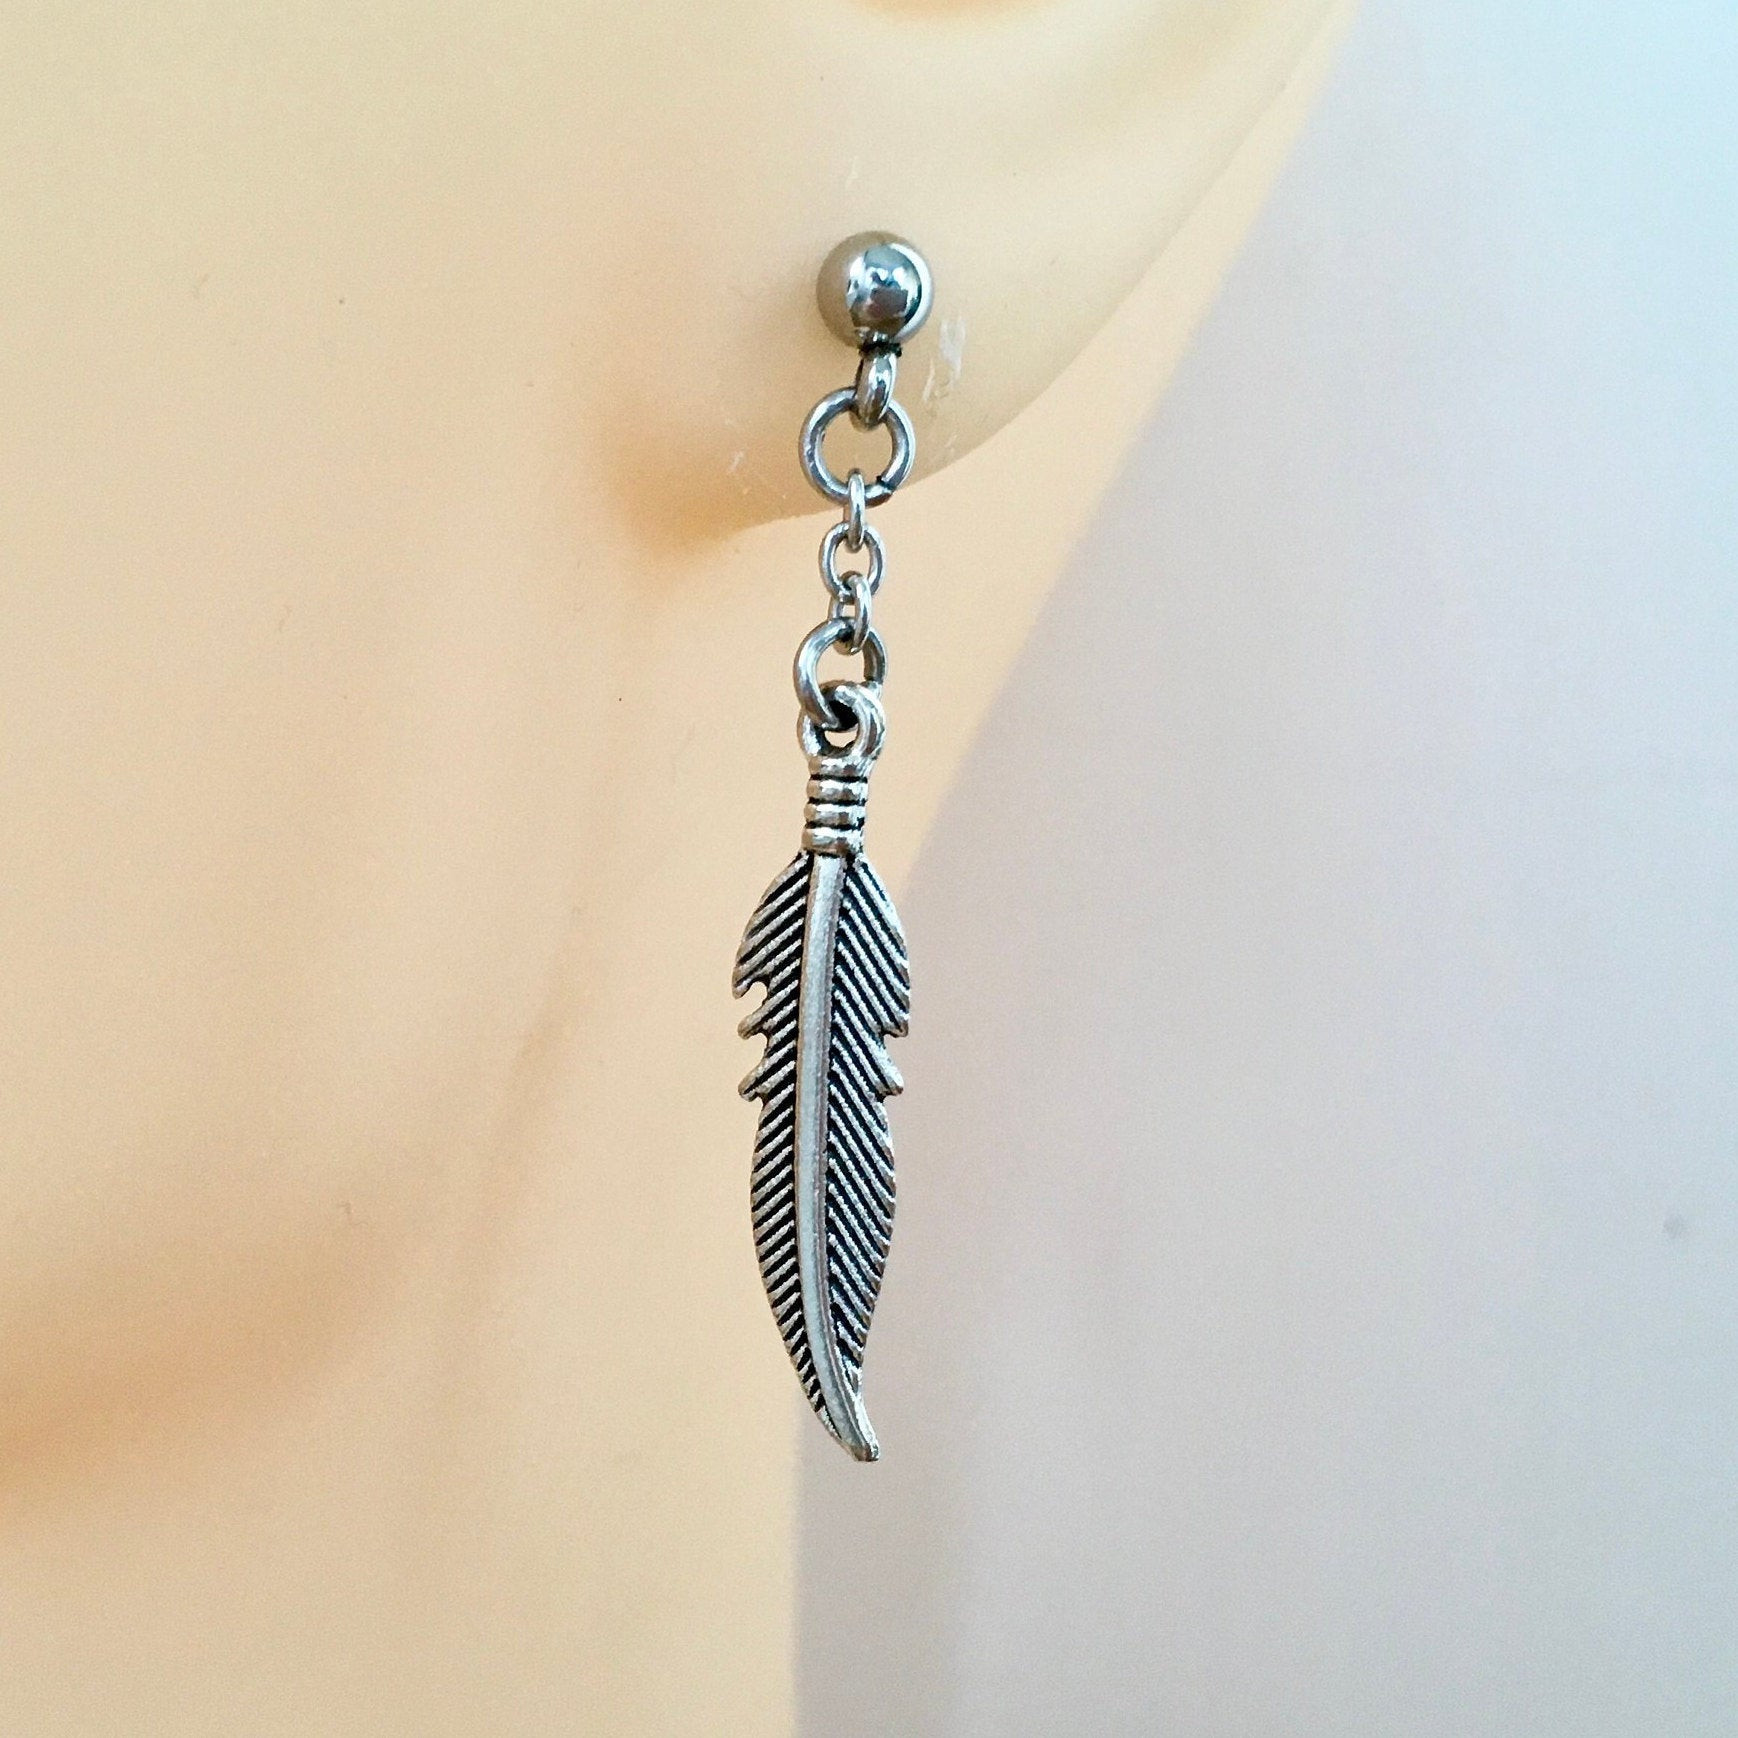 Mens Feather Earrings
 Feather dangle earring single earring or a pair of